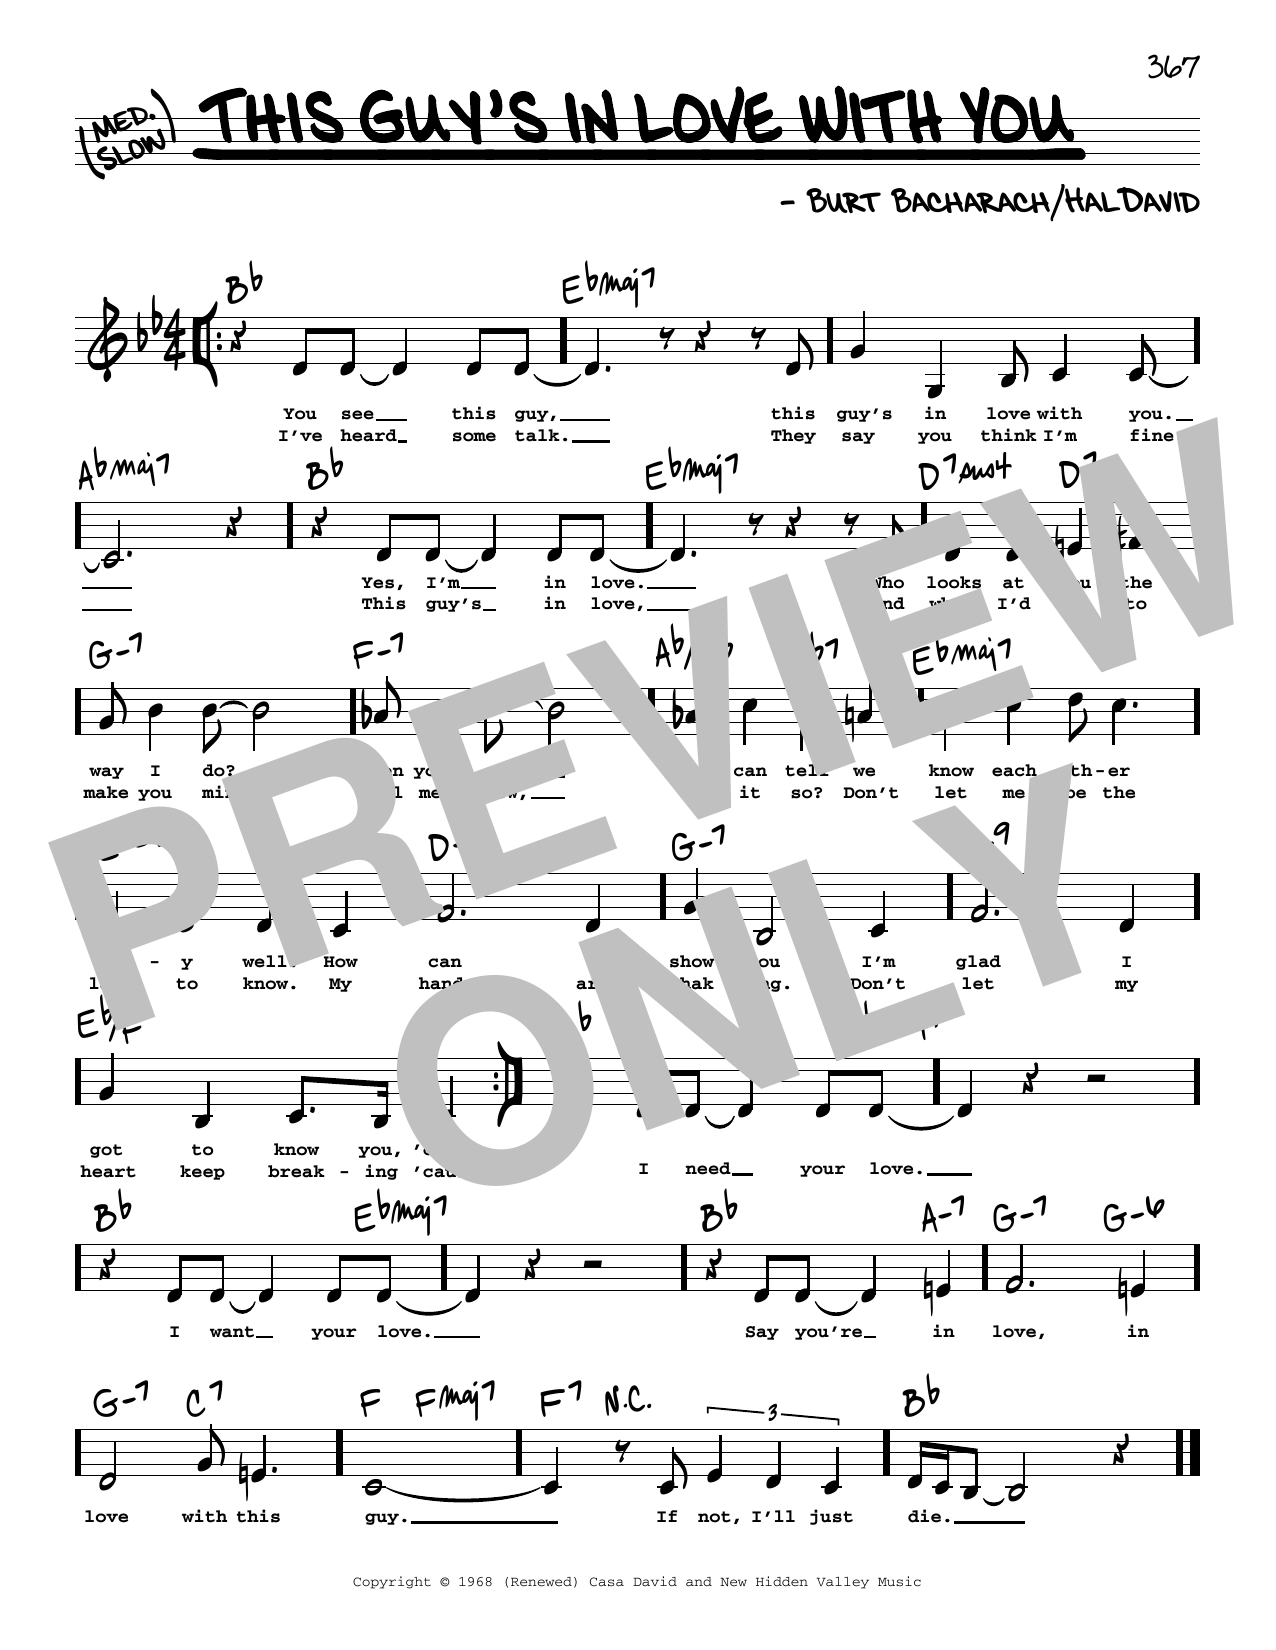 Download Herb Alpert This Guy's In Love With You (Low Voice) Sheet Music